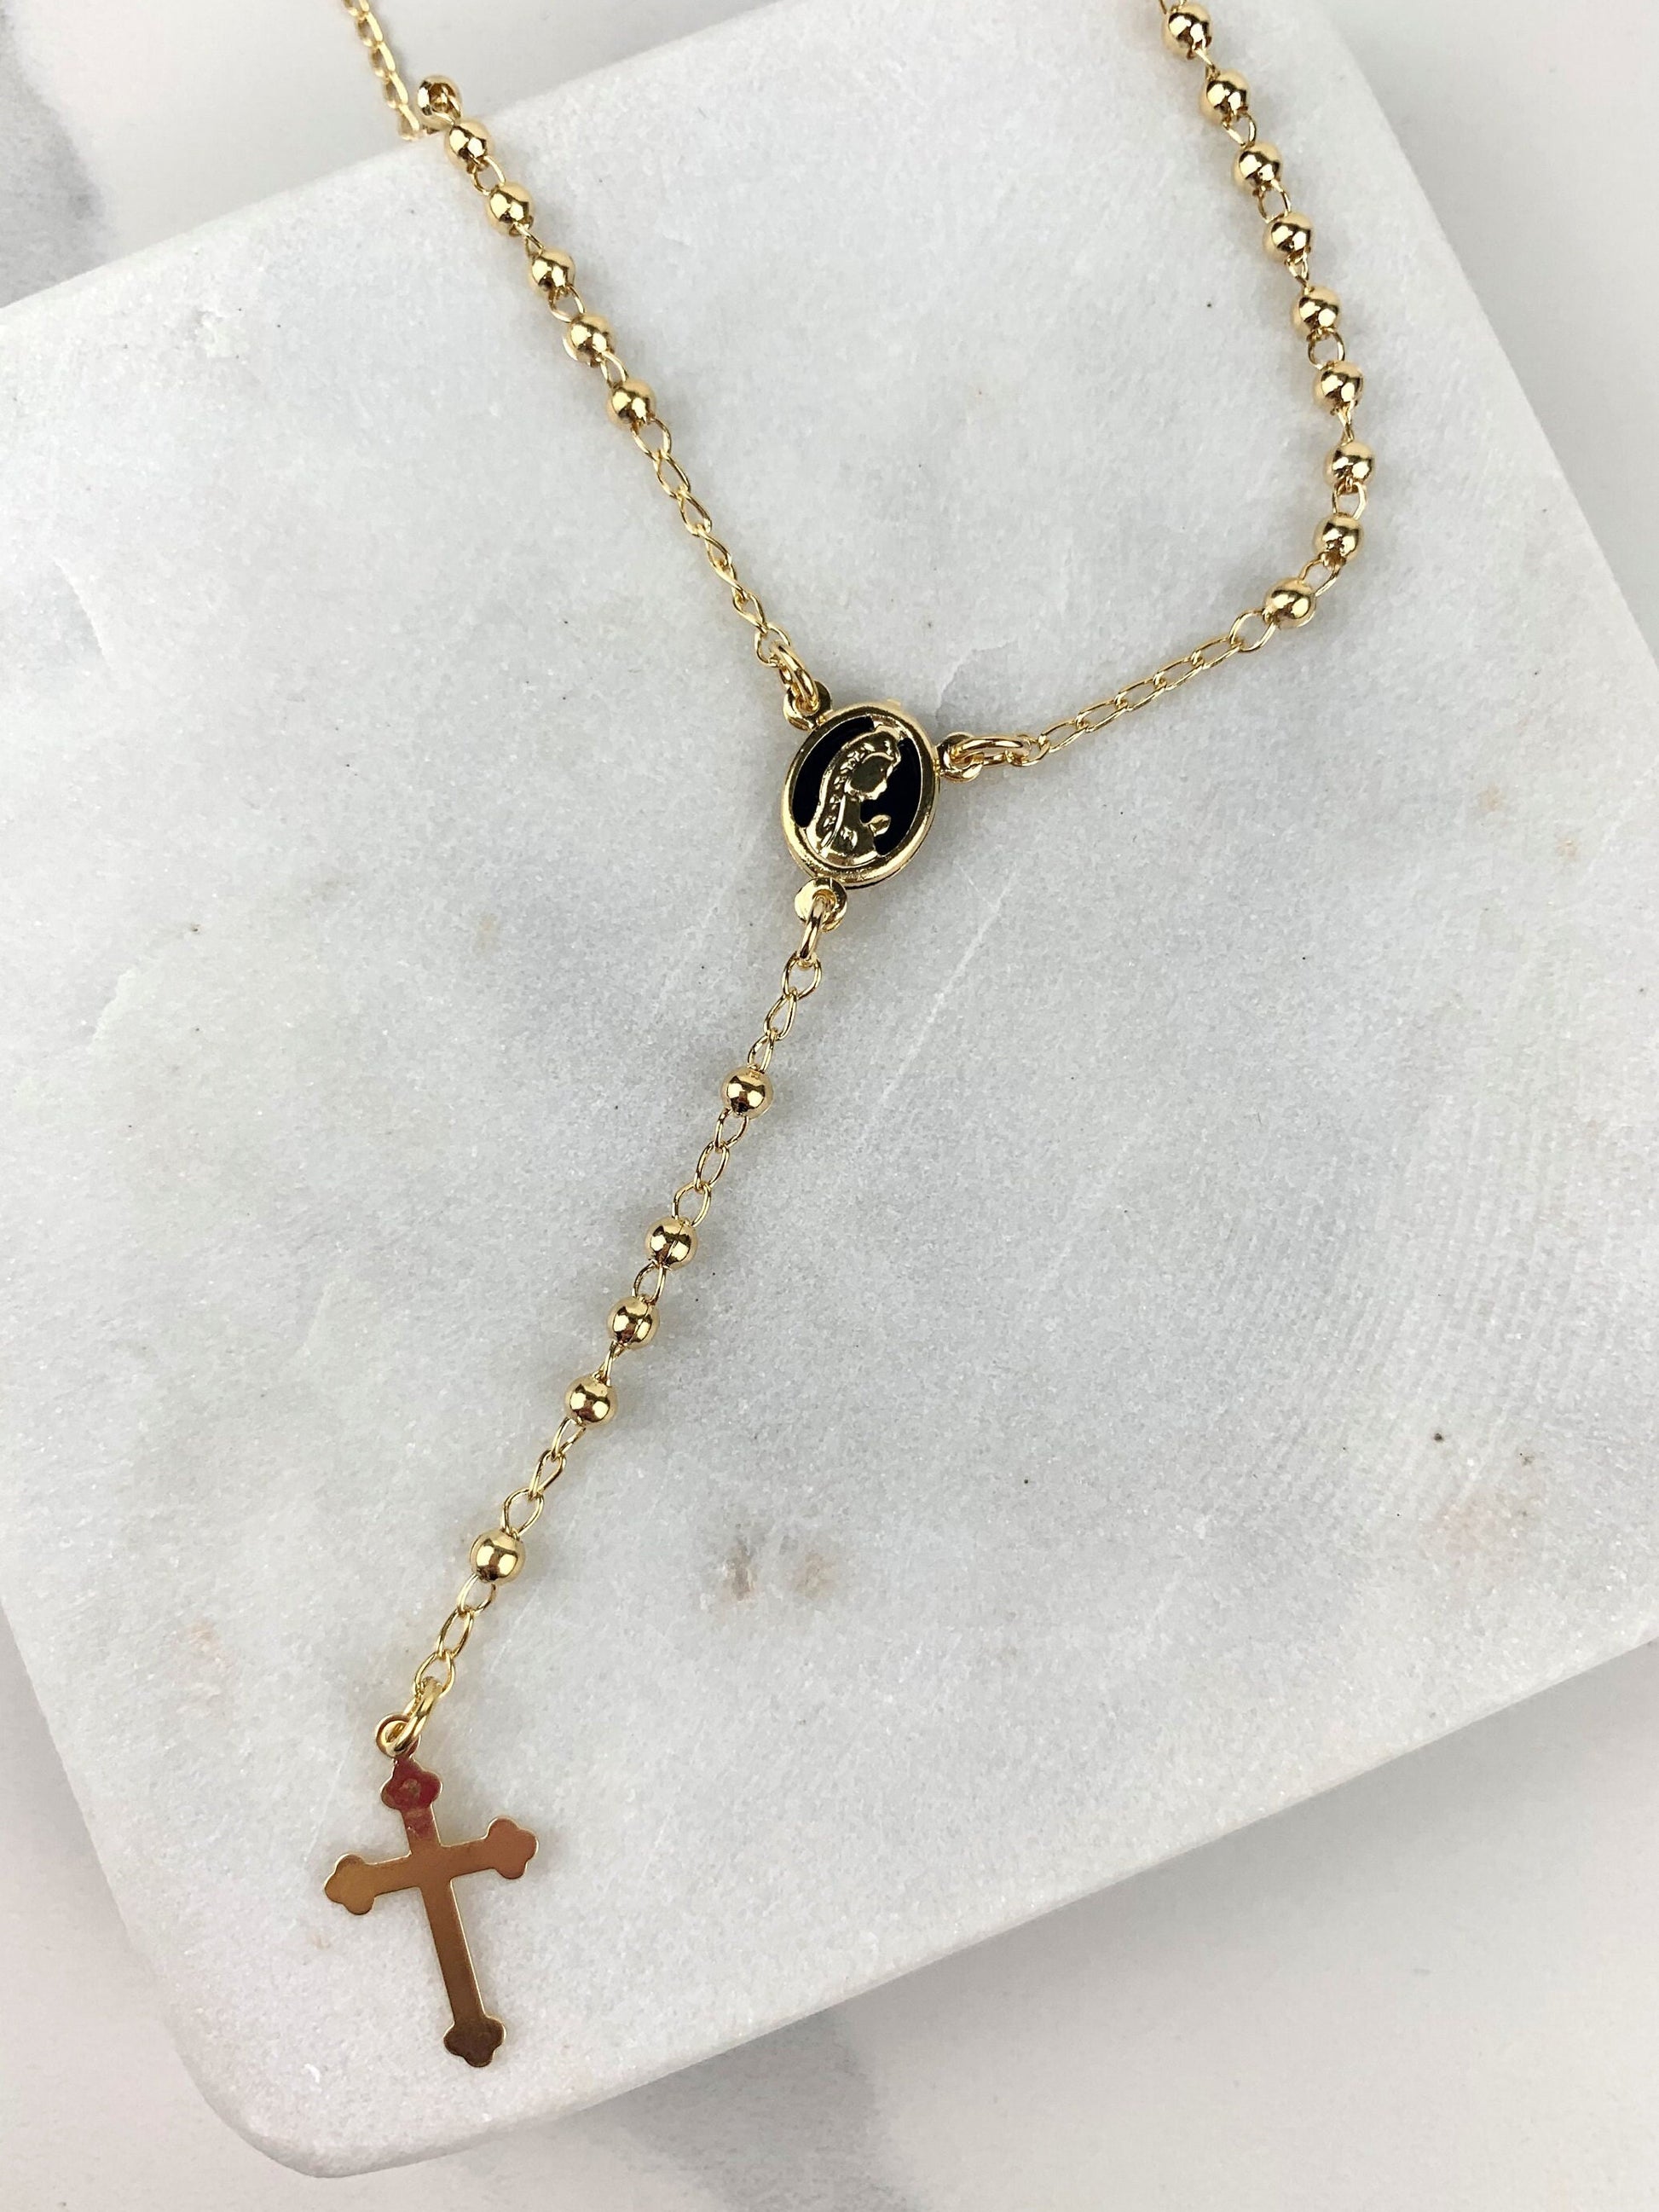 18k Gold Filled Beaded Chain Virgin Mary, Ave Maria Rosary Necklace, Religious Jewelry, Wholesale Jewelry Making Supplies